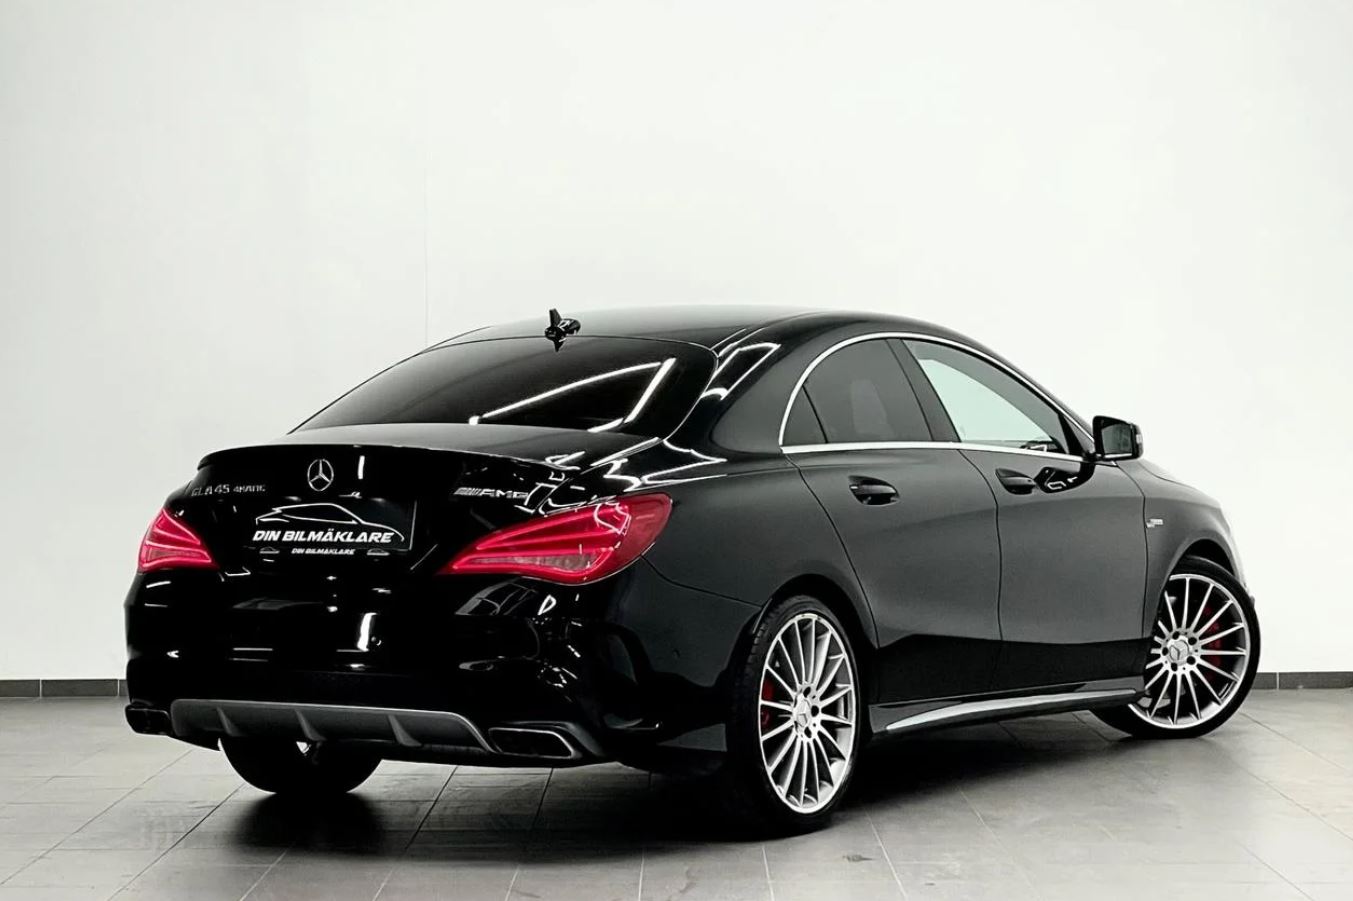 MercedesBenz CLA45 S AMG 4Matic 2020  pictures information  specs